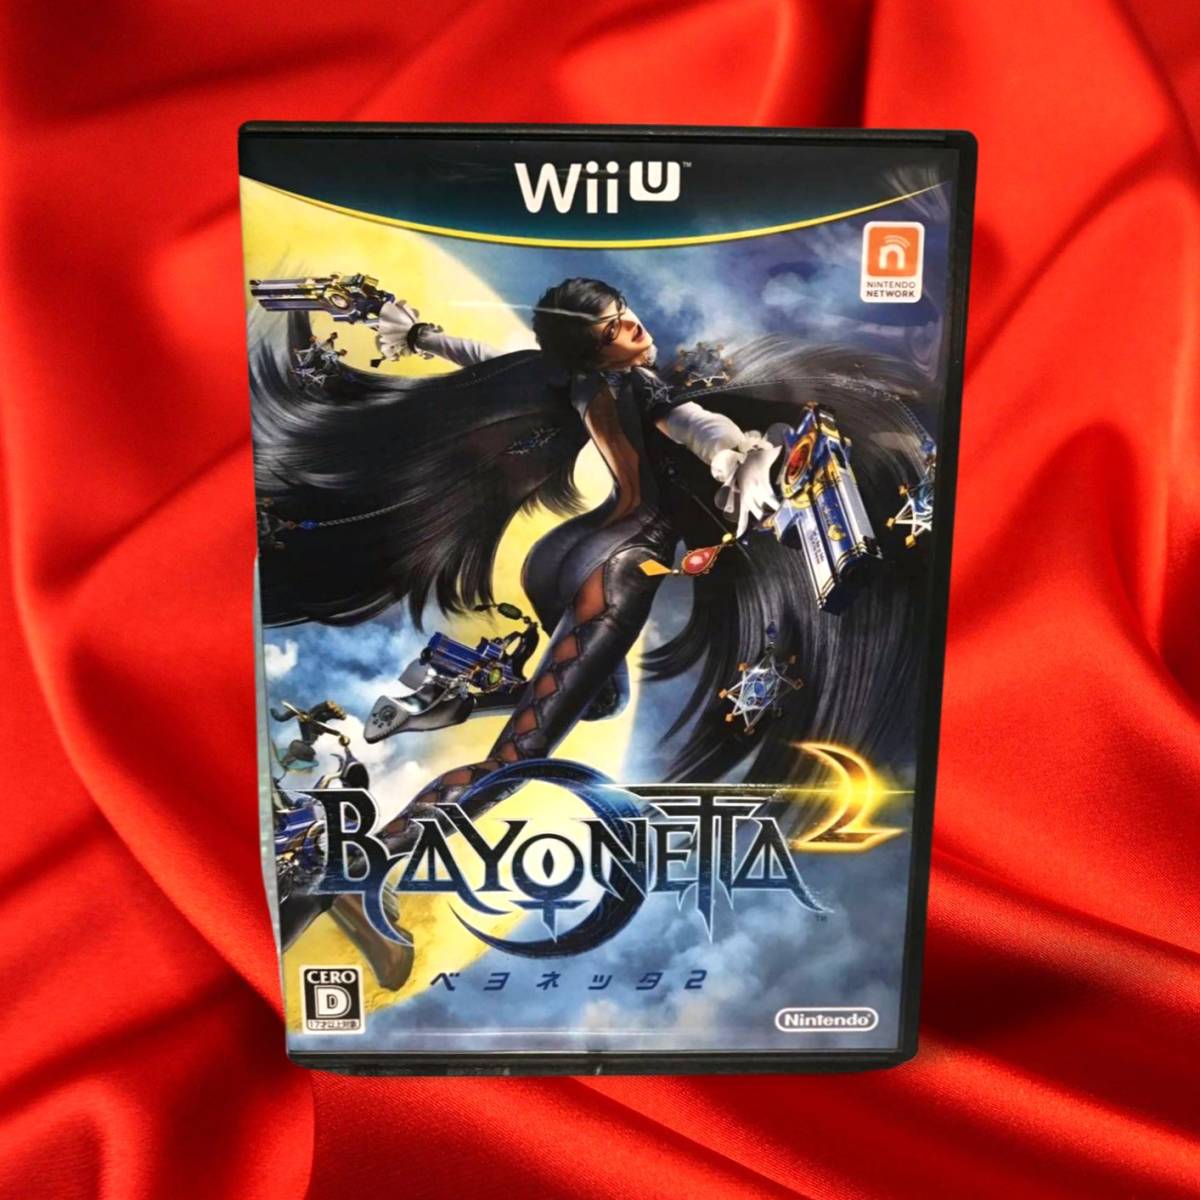 Wii U version Bayonetta 2 (Wii U version [ Bayonetta ]. game disk including in a package )